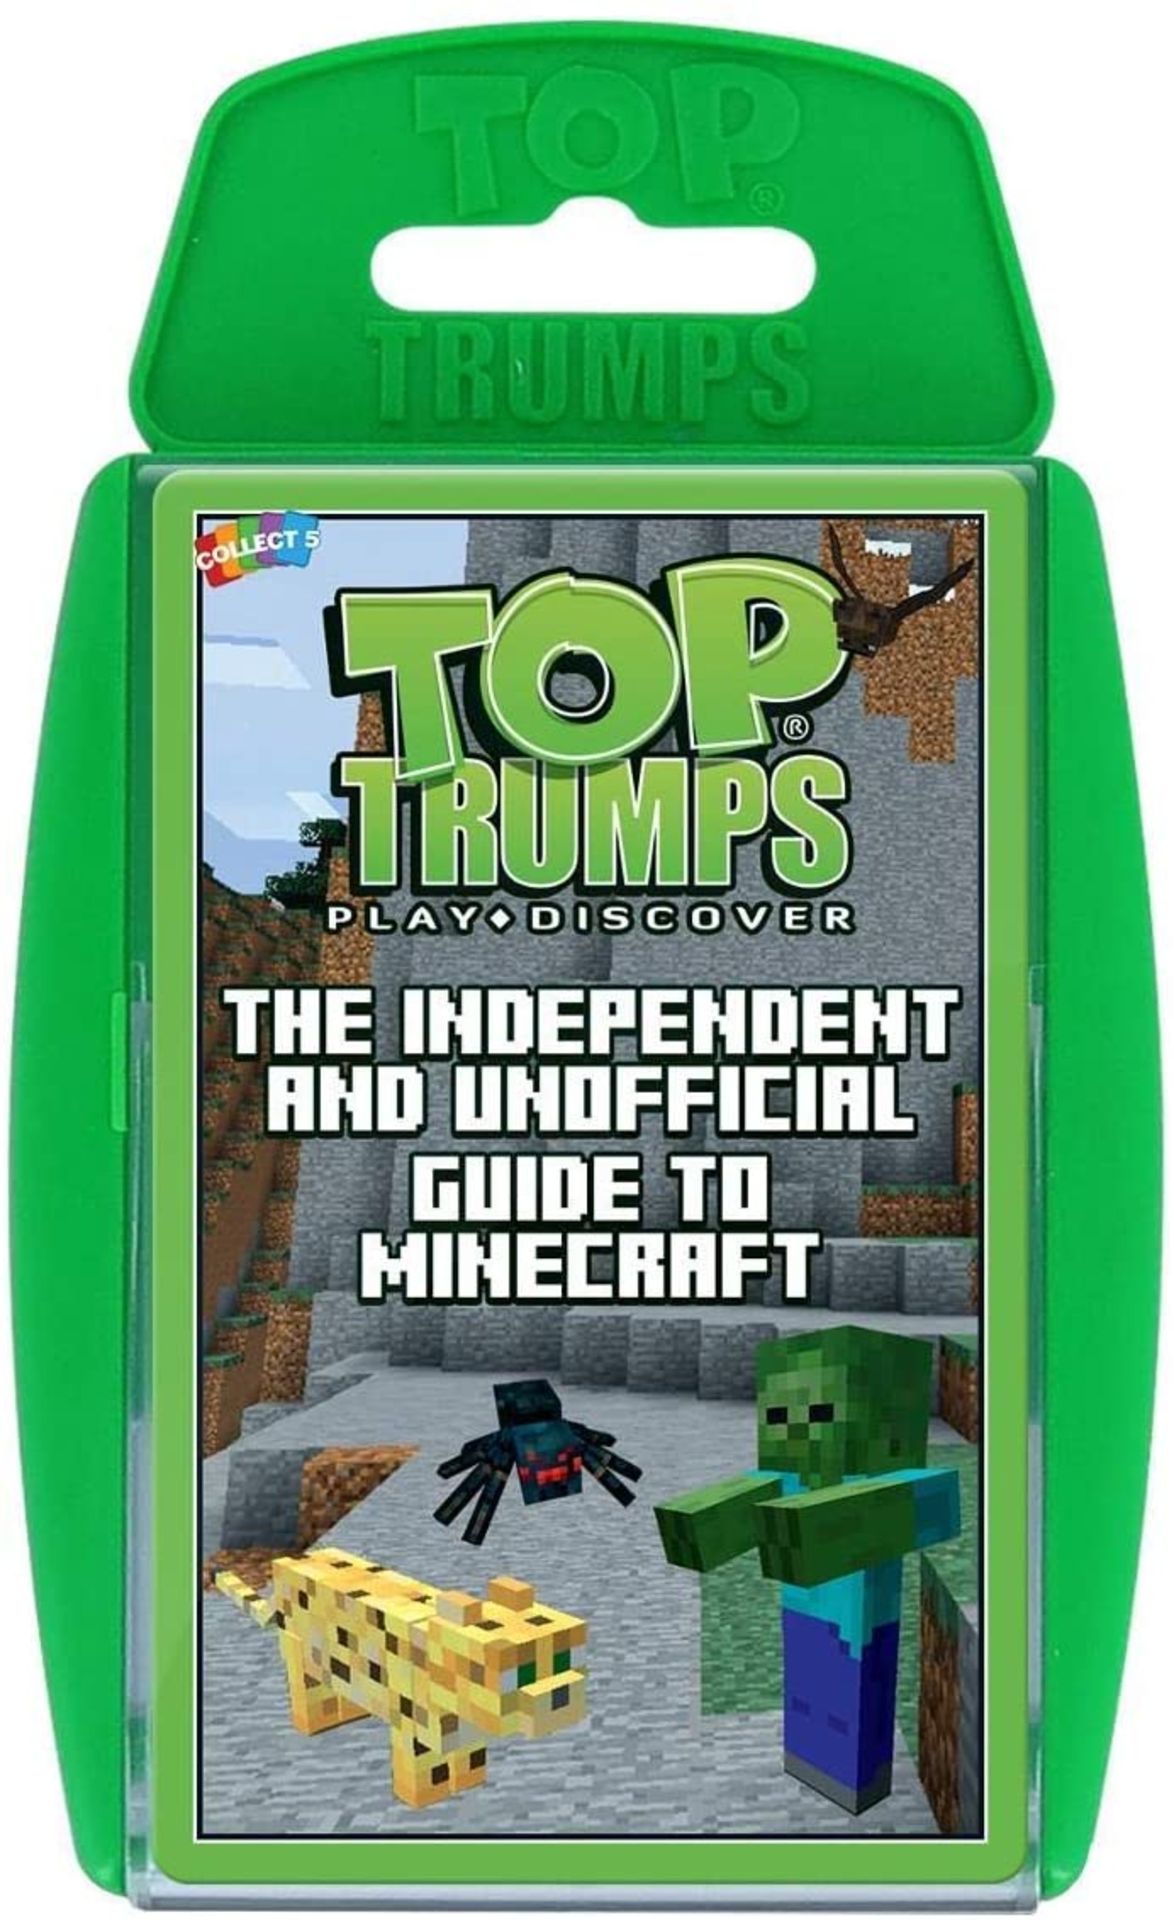 30 x Top Trumps 037310 The Unofficial and Independent Guide to Minecraft Card Game, Green |503690503